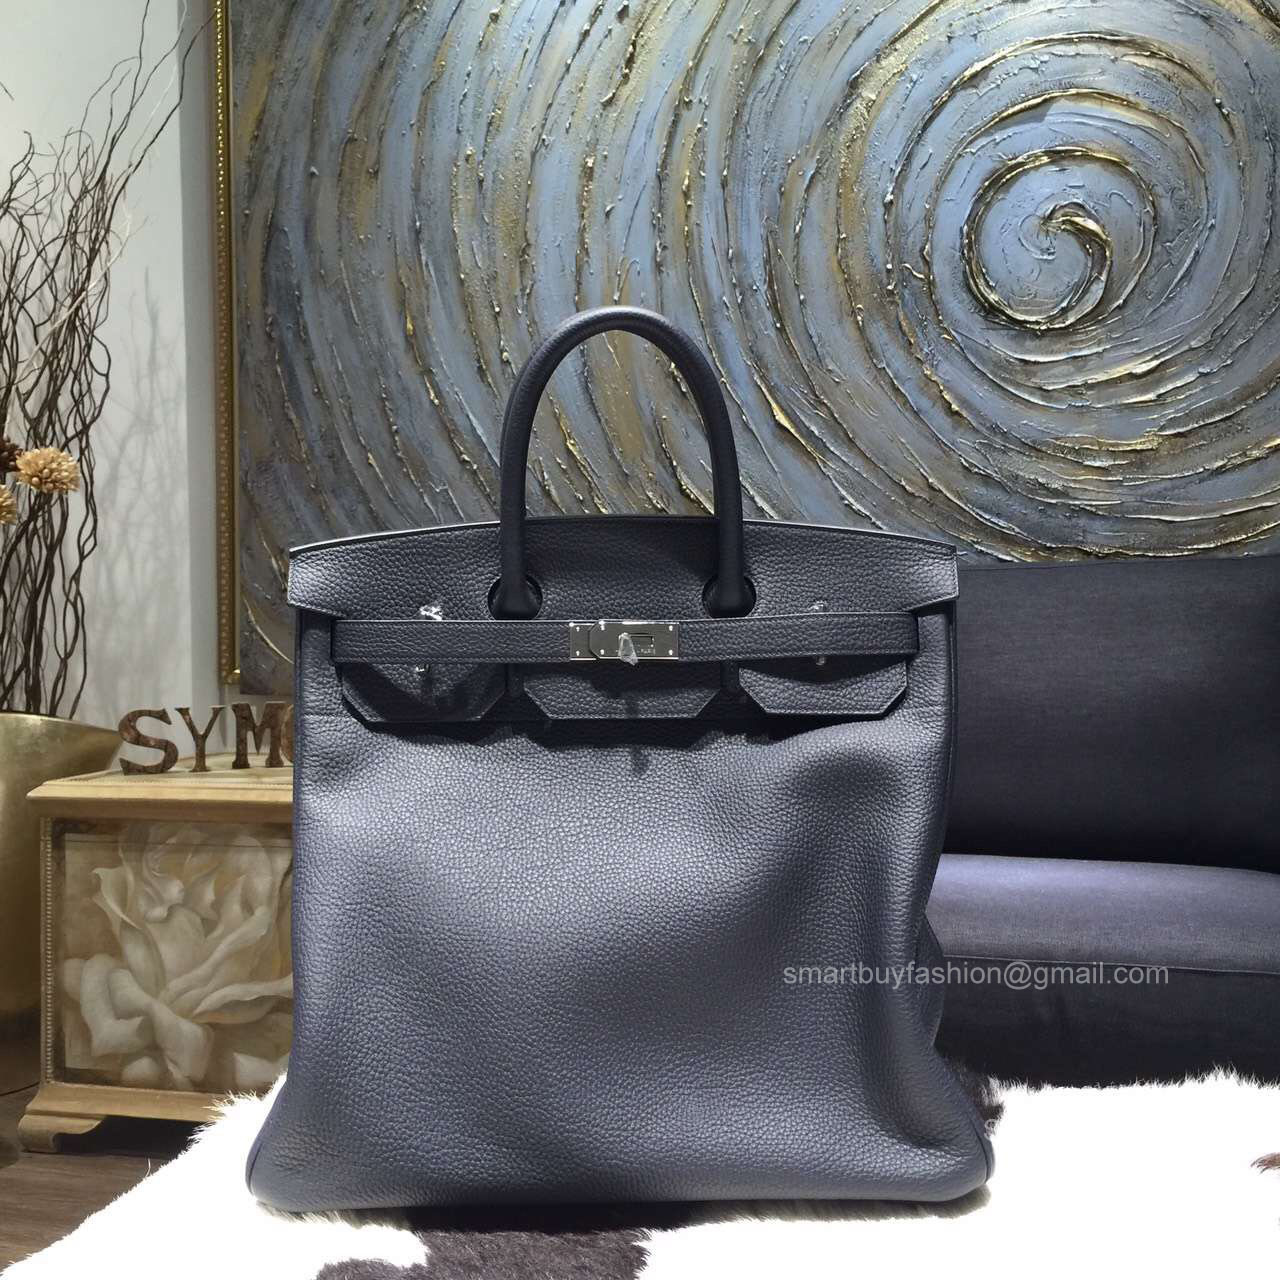 Help me QC this birkin 40 HAC? Any experts able to help? Should I GL? :  r/DesignerReps